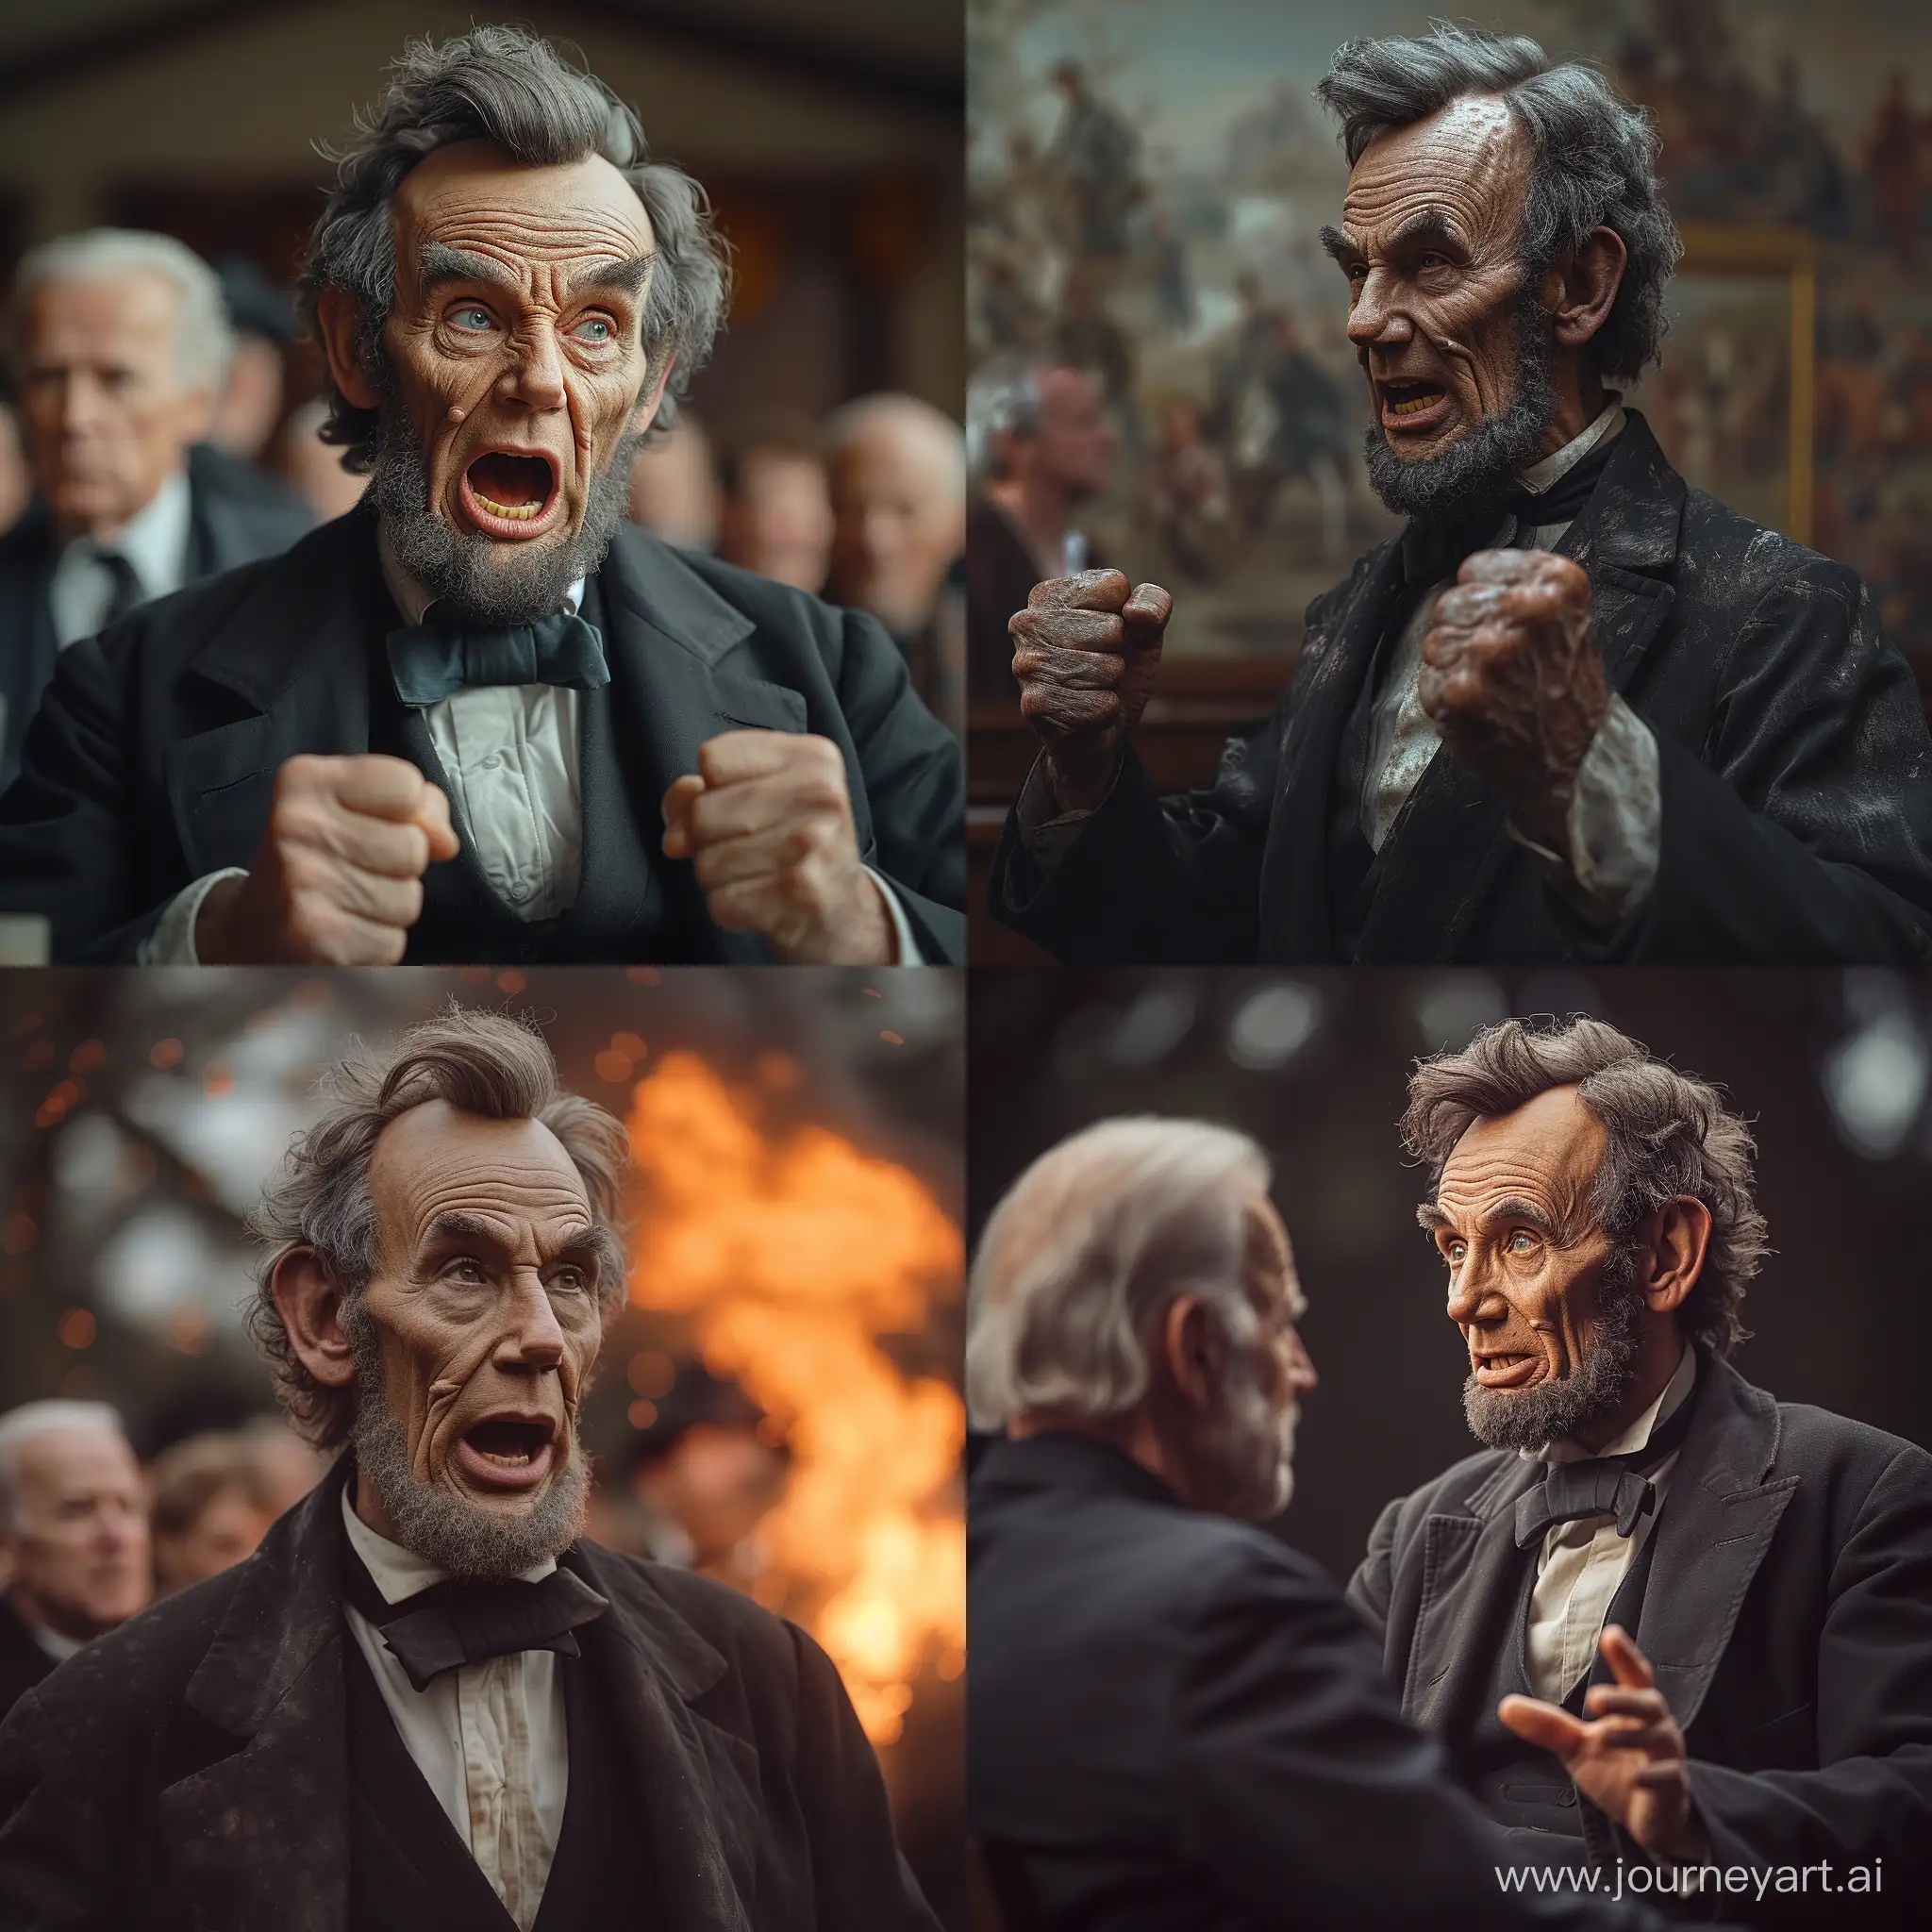 Angry-Abraham-Lincoln-Confronts-Joe-Biden-in-Realistic-Full-Body-Portrait